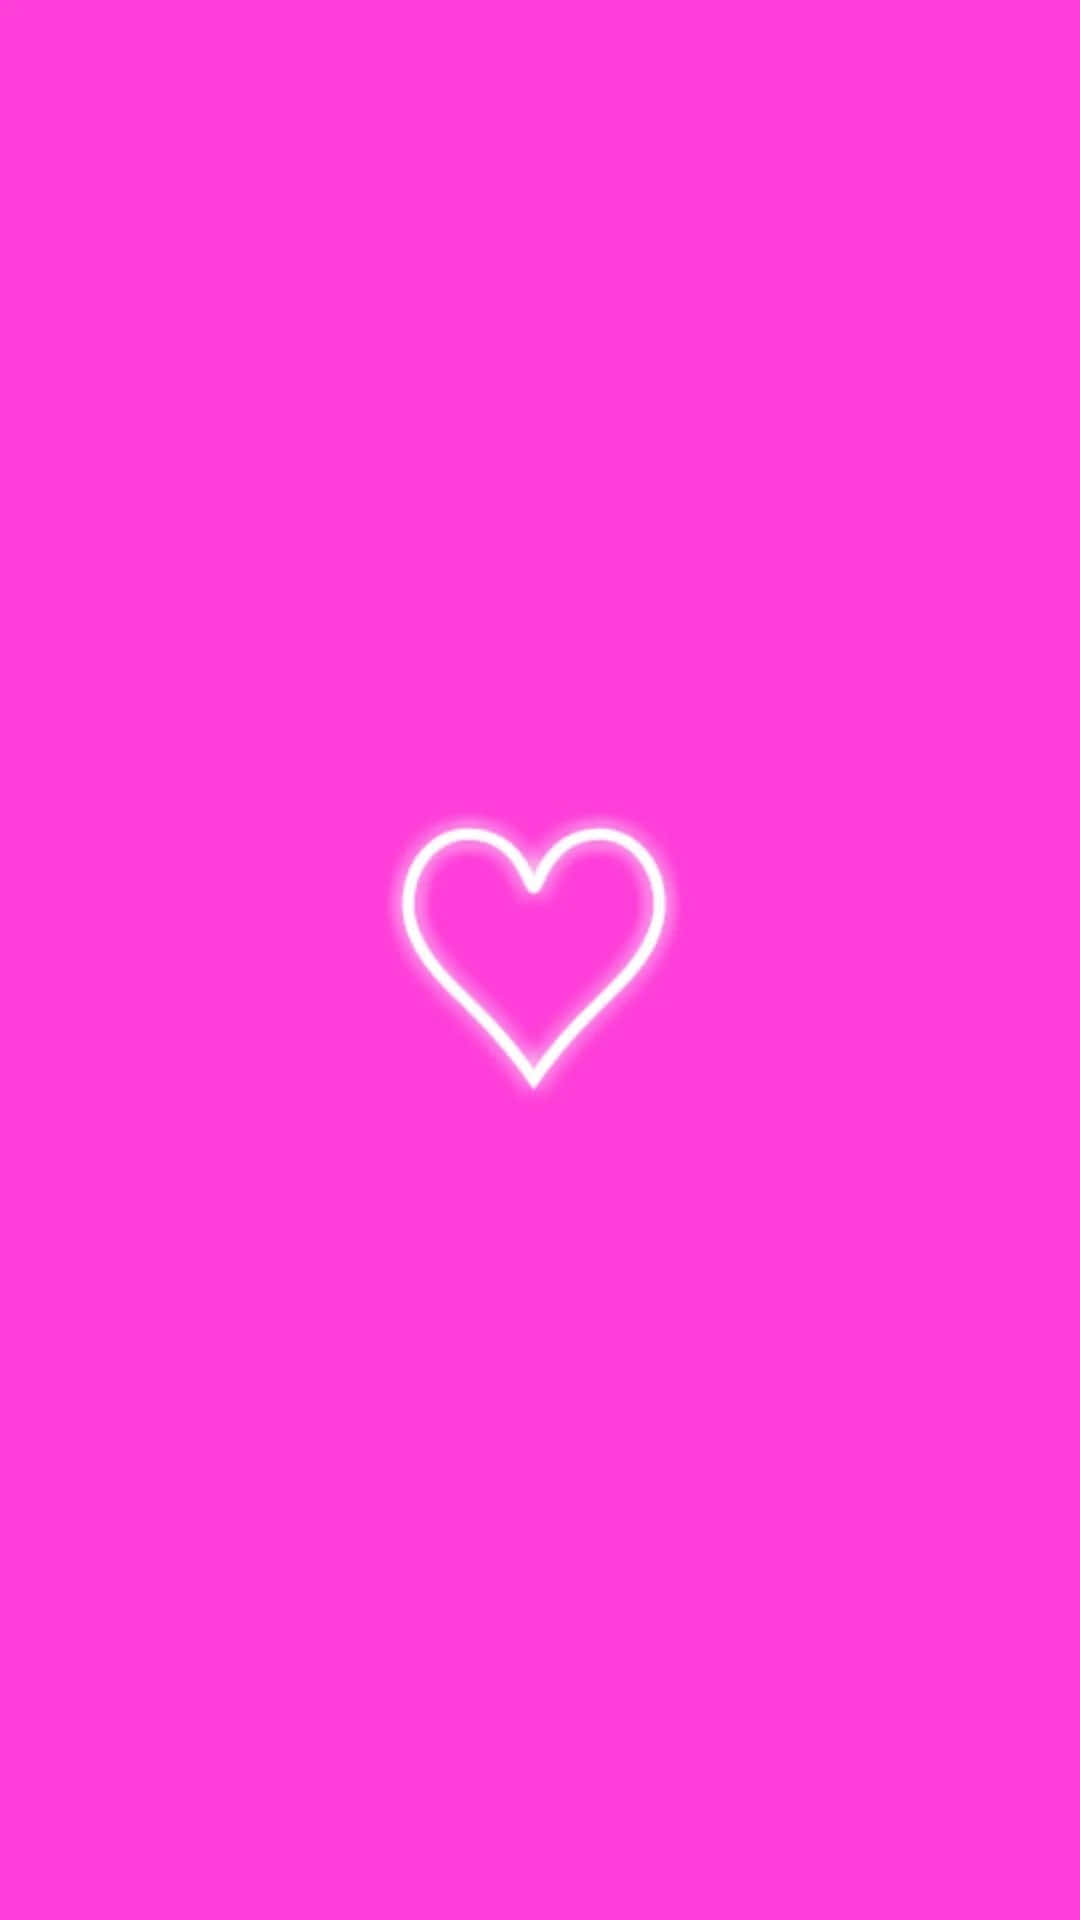 A Heart Shaped Neon Light On A Pink Background